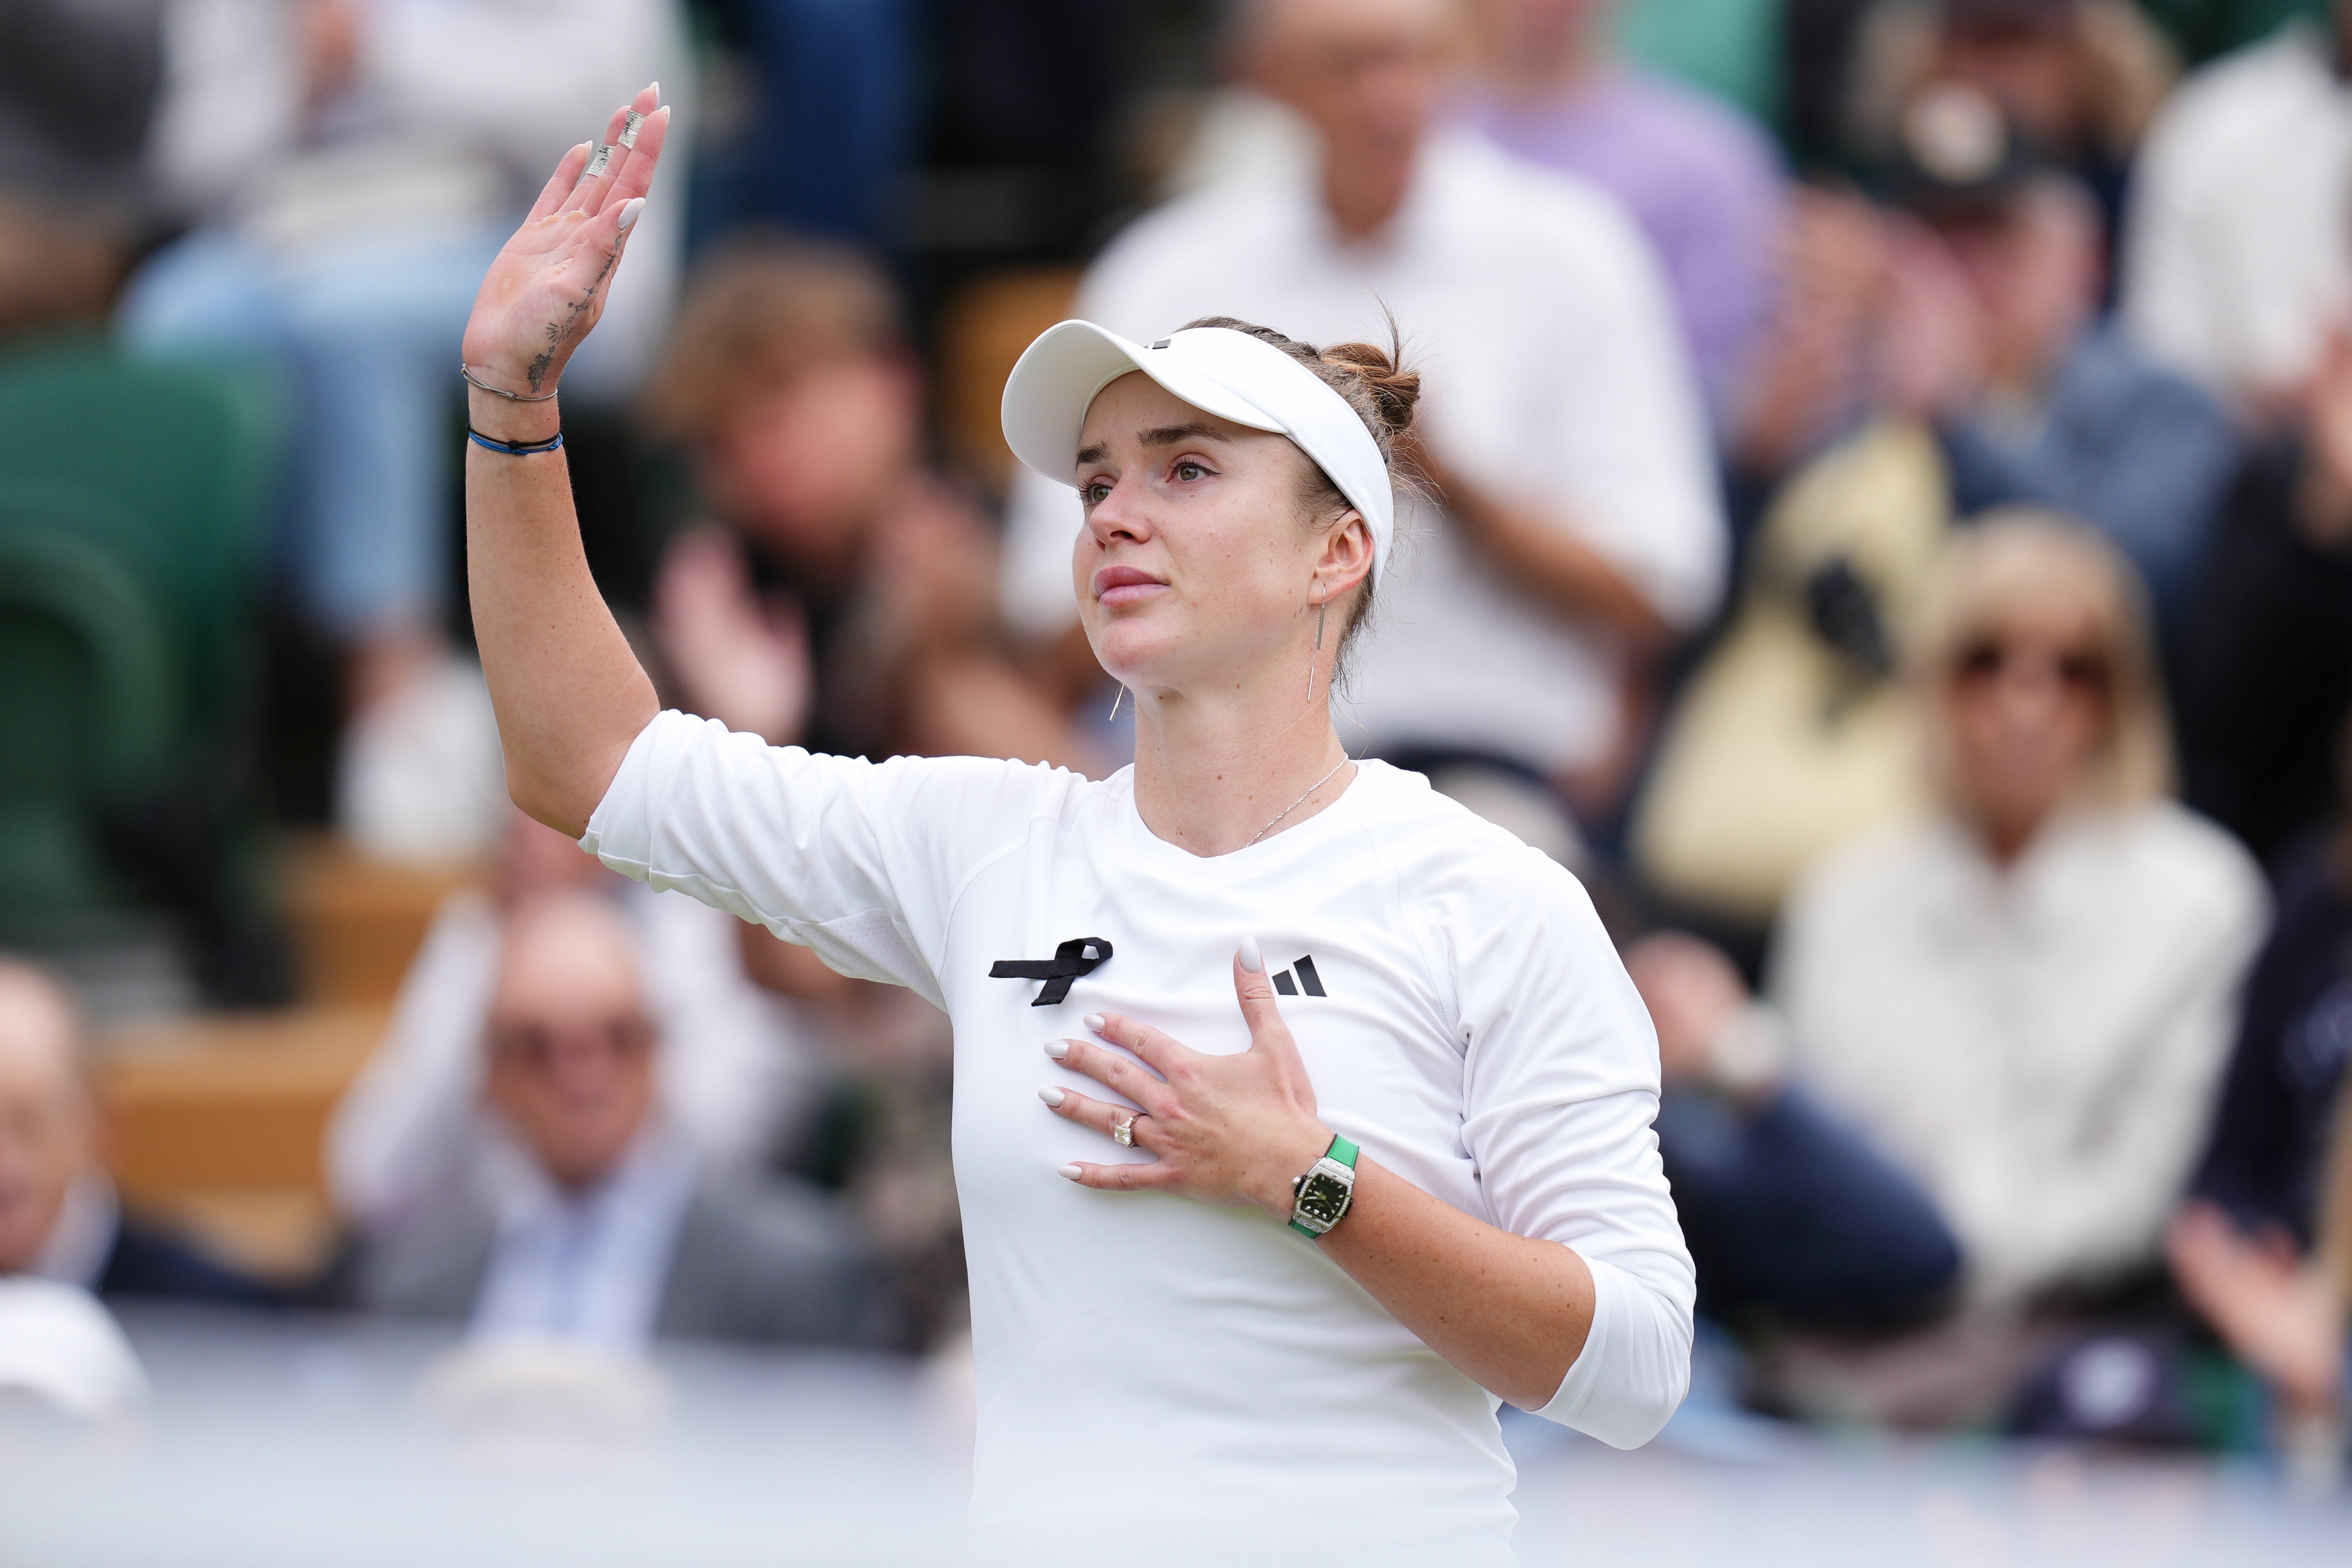 Elina Svitolina reached the quarter-finals on an emotional day for the Ukrainian people on Monday (John Walton/PA)